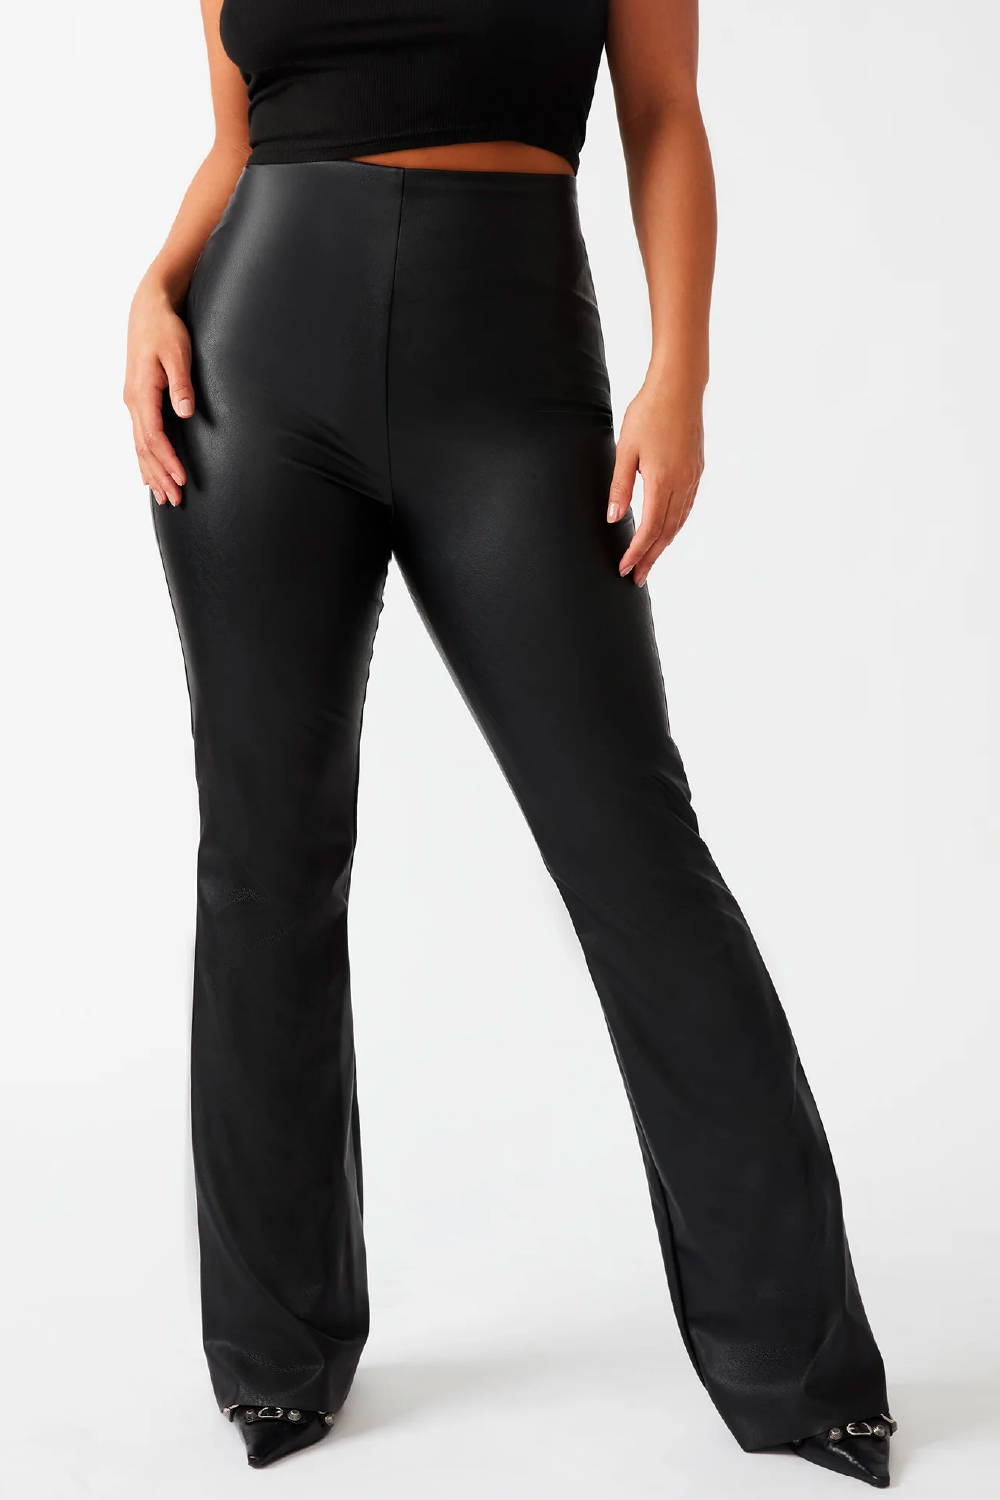 CRZ YOGA Womens High Waisted Stretch Leather Leggings With Tummy Control  And Pleather Running Tights With Pockets Matte Faux Leather, 25/28 From  Jeanscn, $25.88 | DHgate.Com